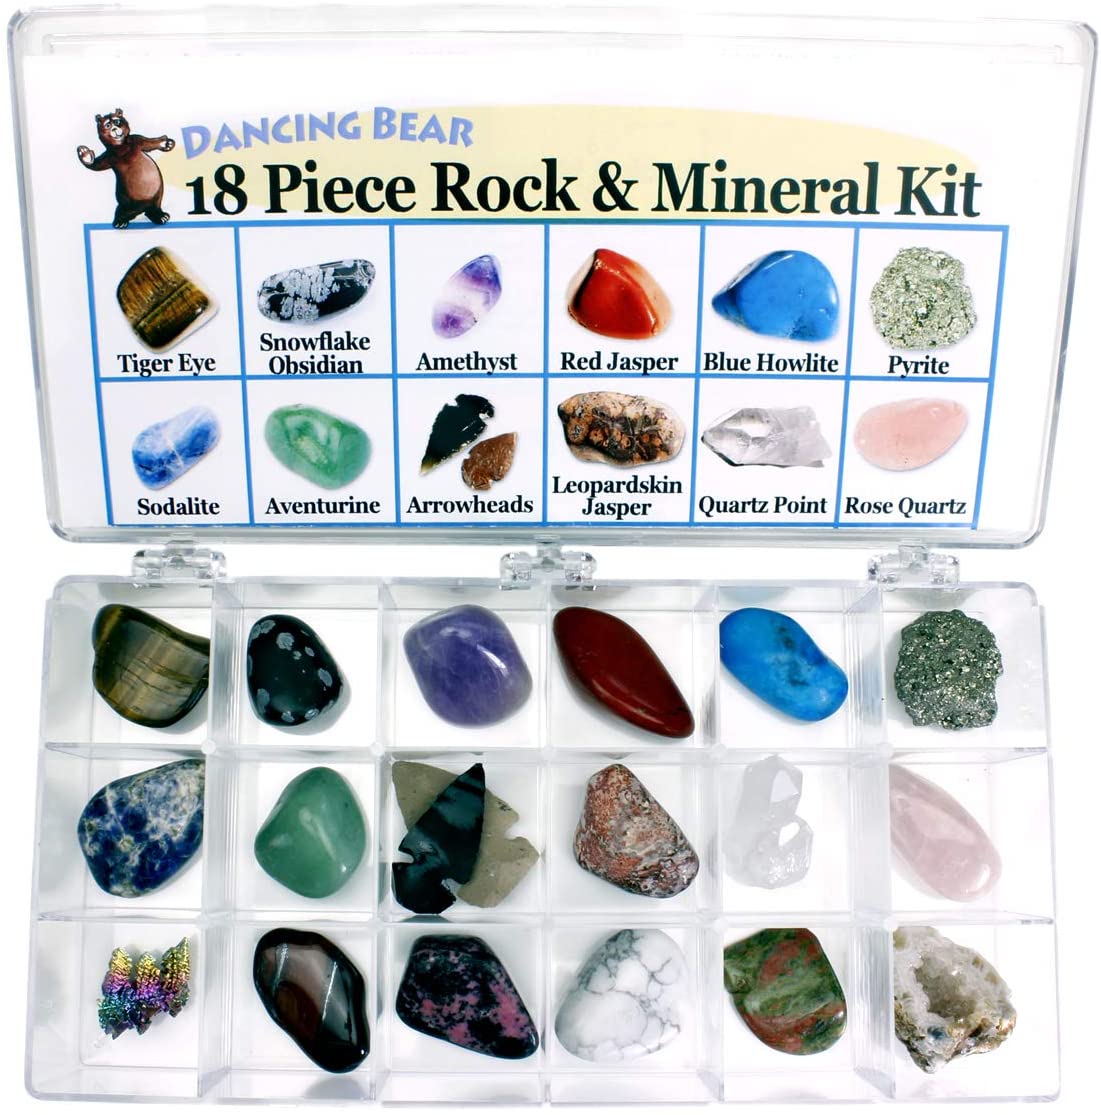 Rock and Mineral Educational Collection in Collection Box - 18 Pieces with Description Sheet and Educational Information